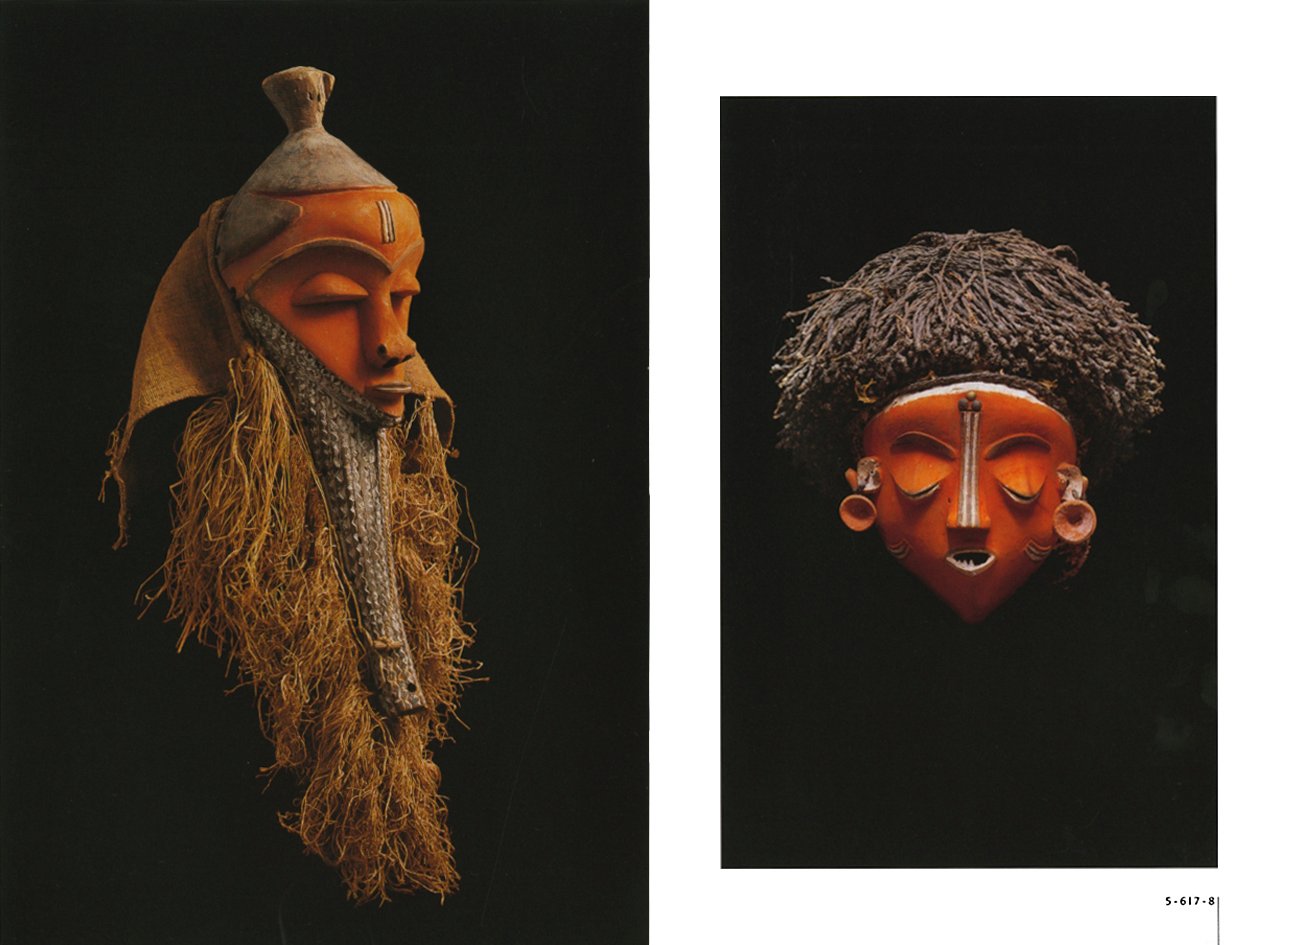 Book cover of Pende, Visions of Africa, featuring a carved wood mask. Published by 5 Continents Editions.